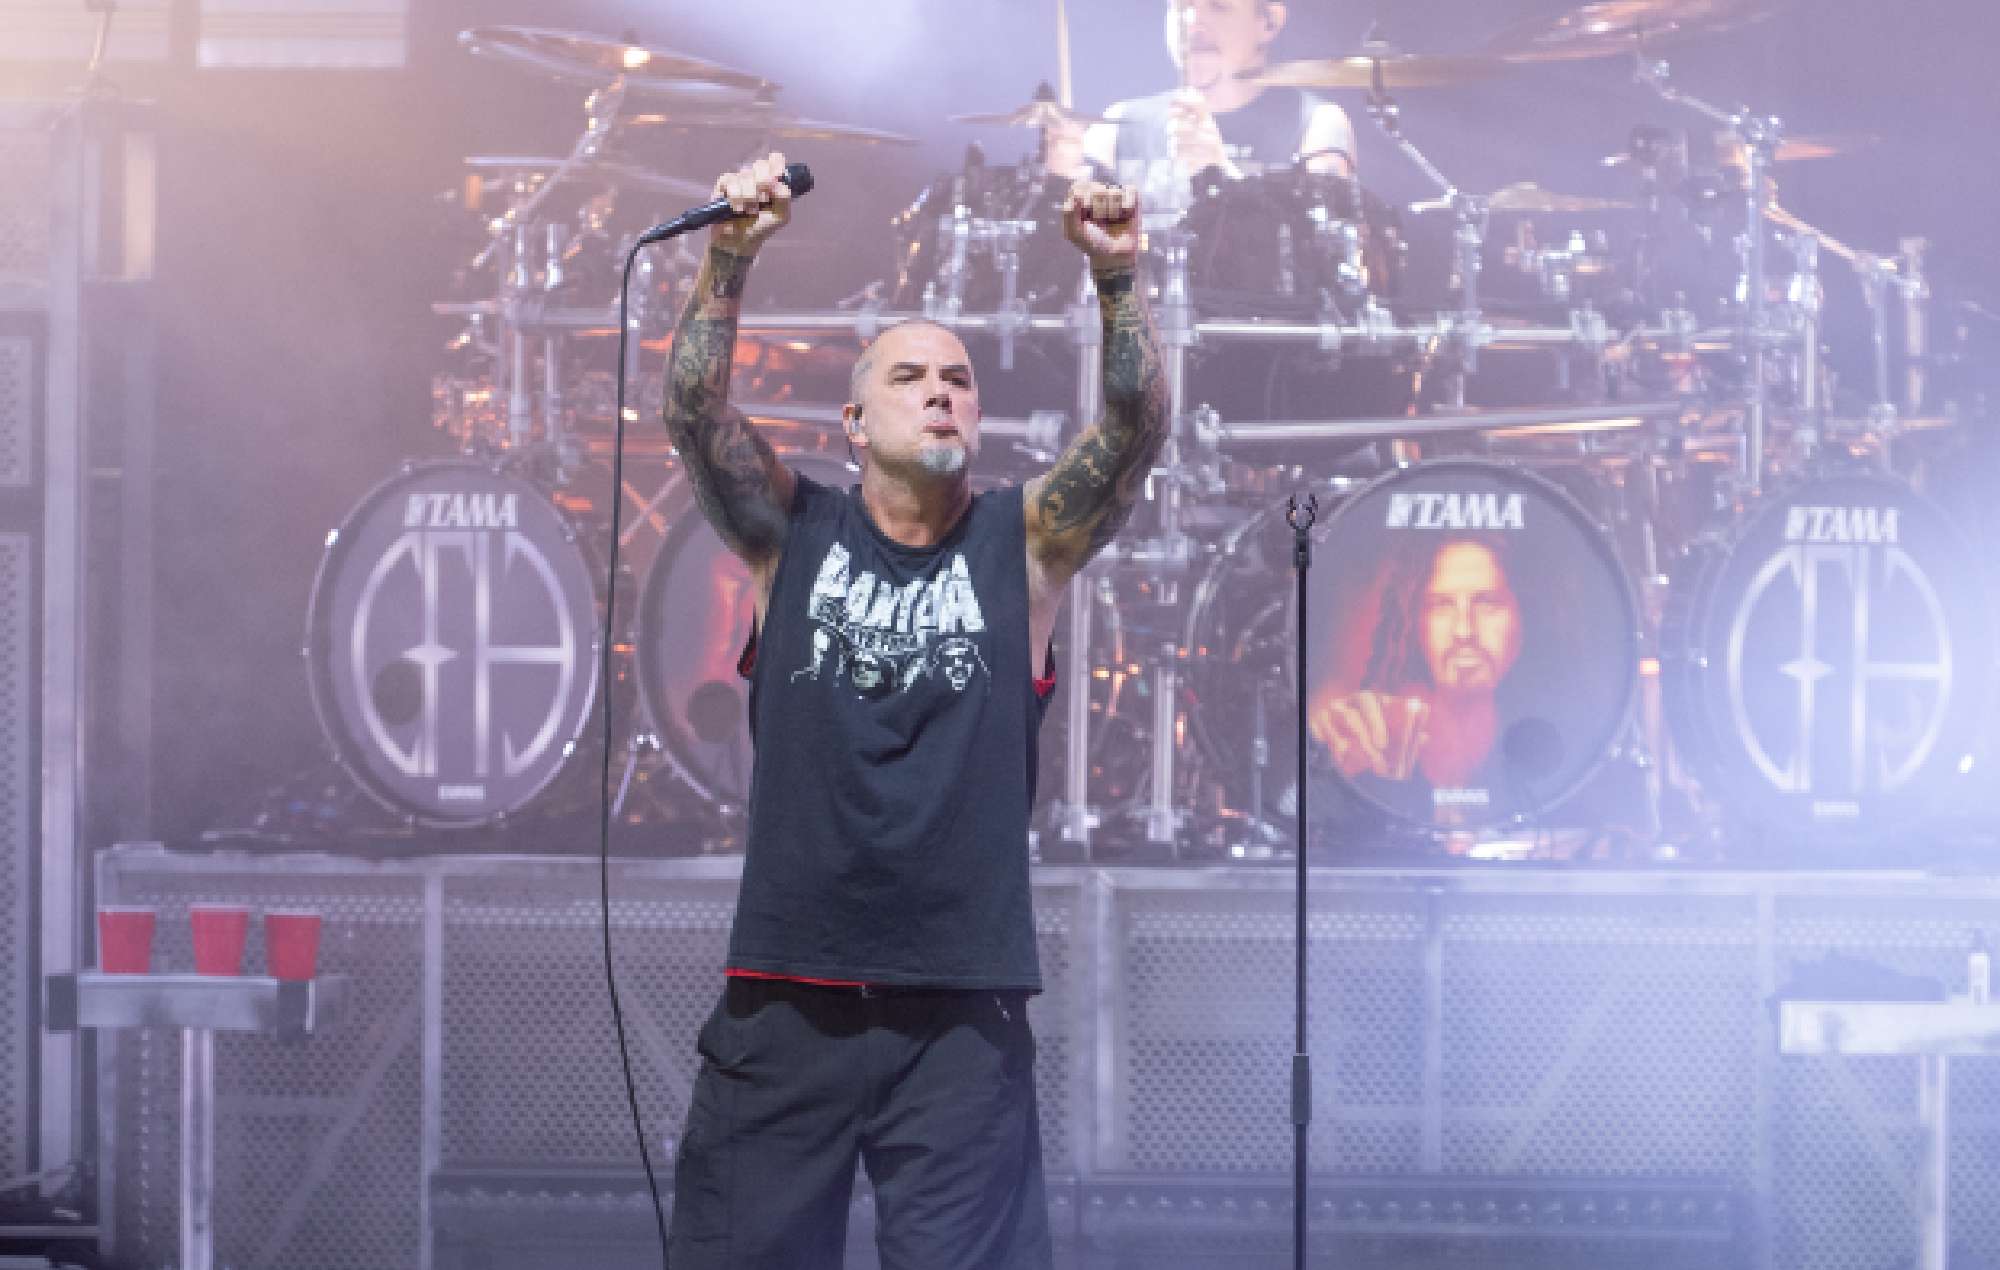 Pantera joined onstage by Randy Blythe and Dimebag Darrell’s girlfriend Rita Haney at Texas show